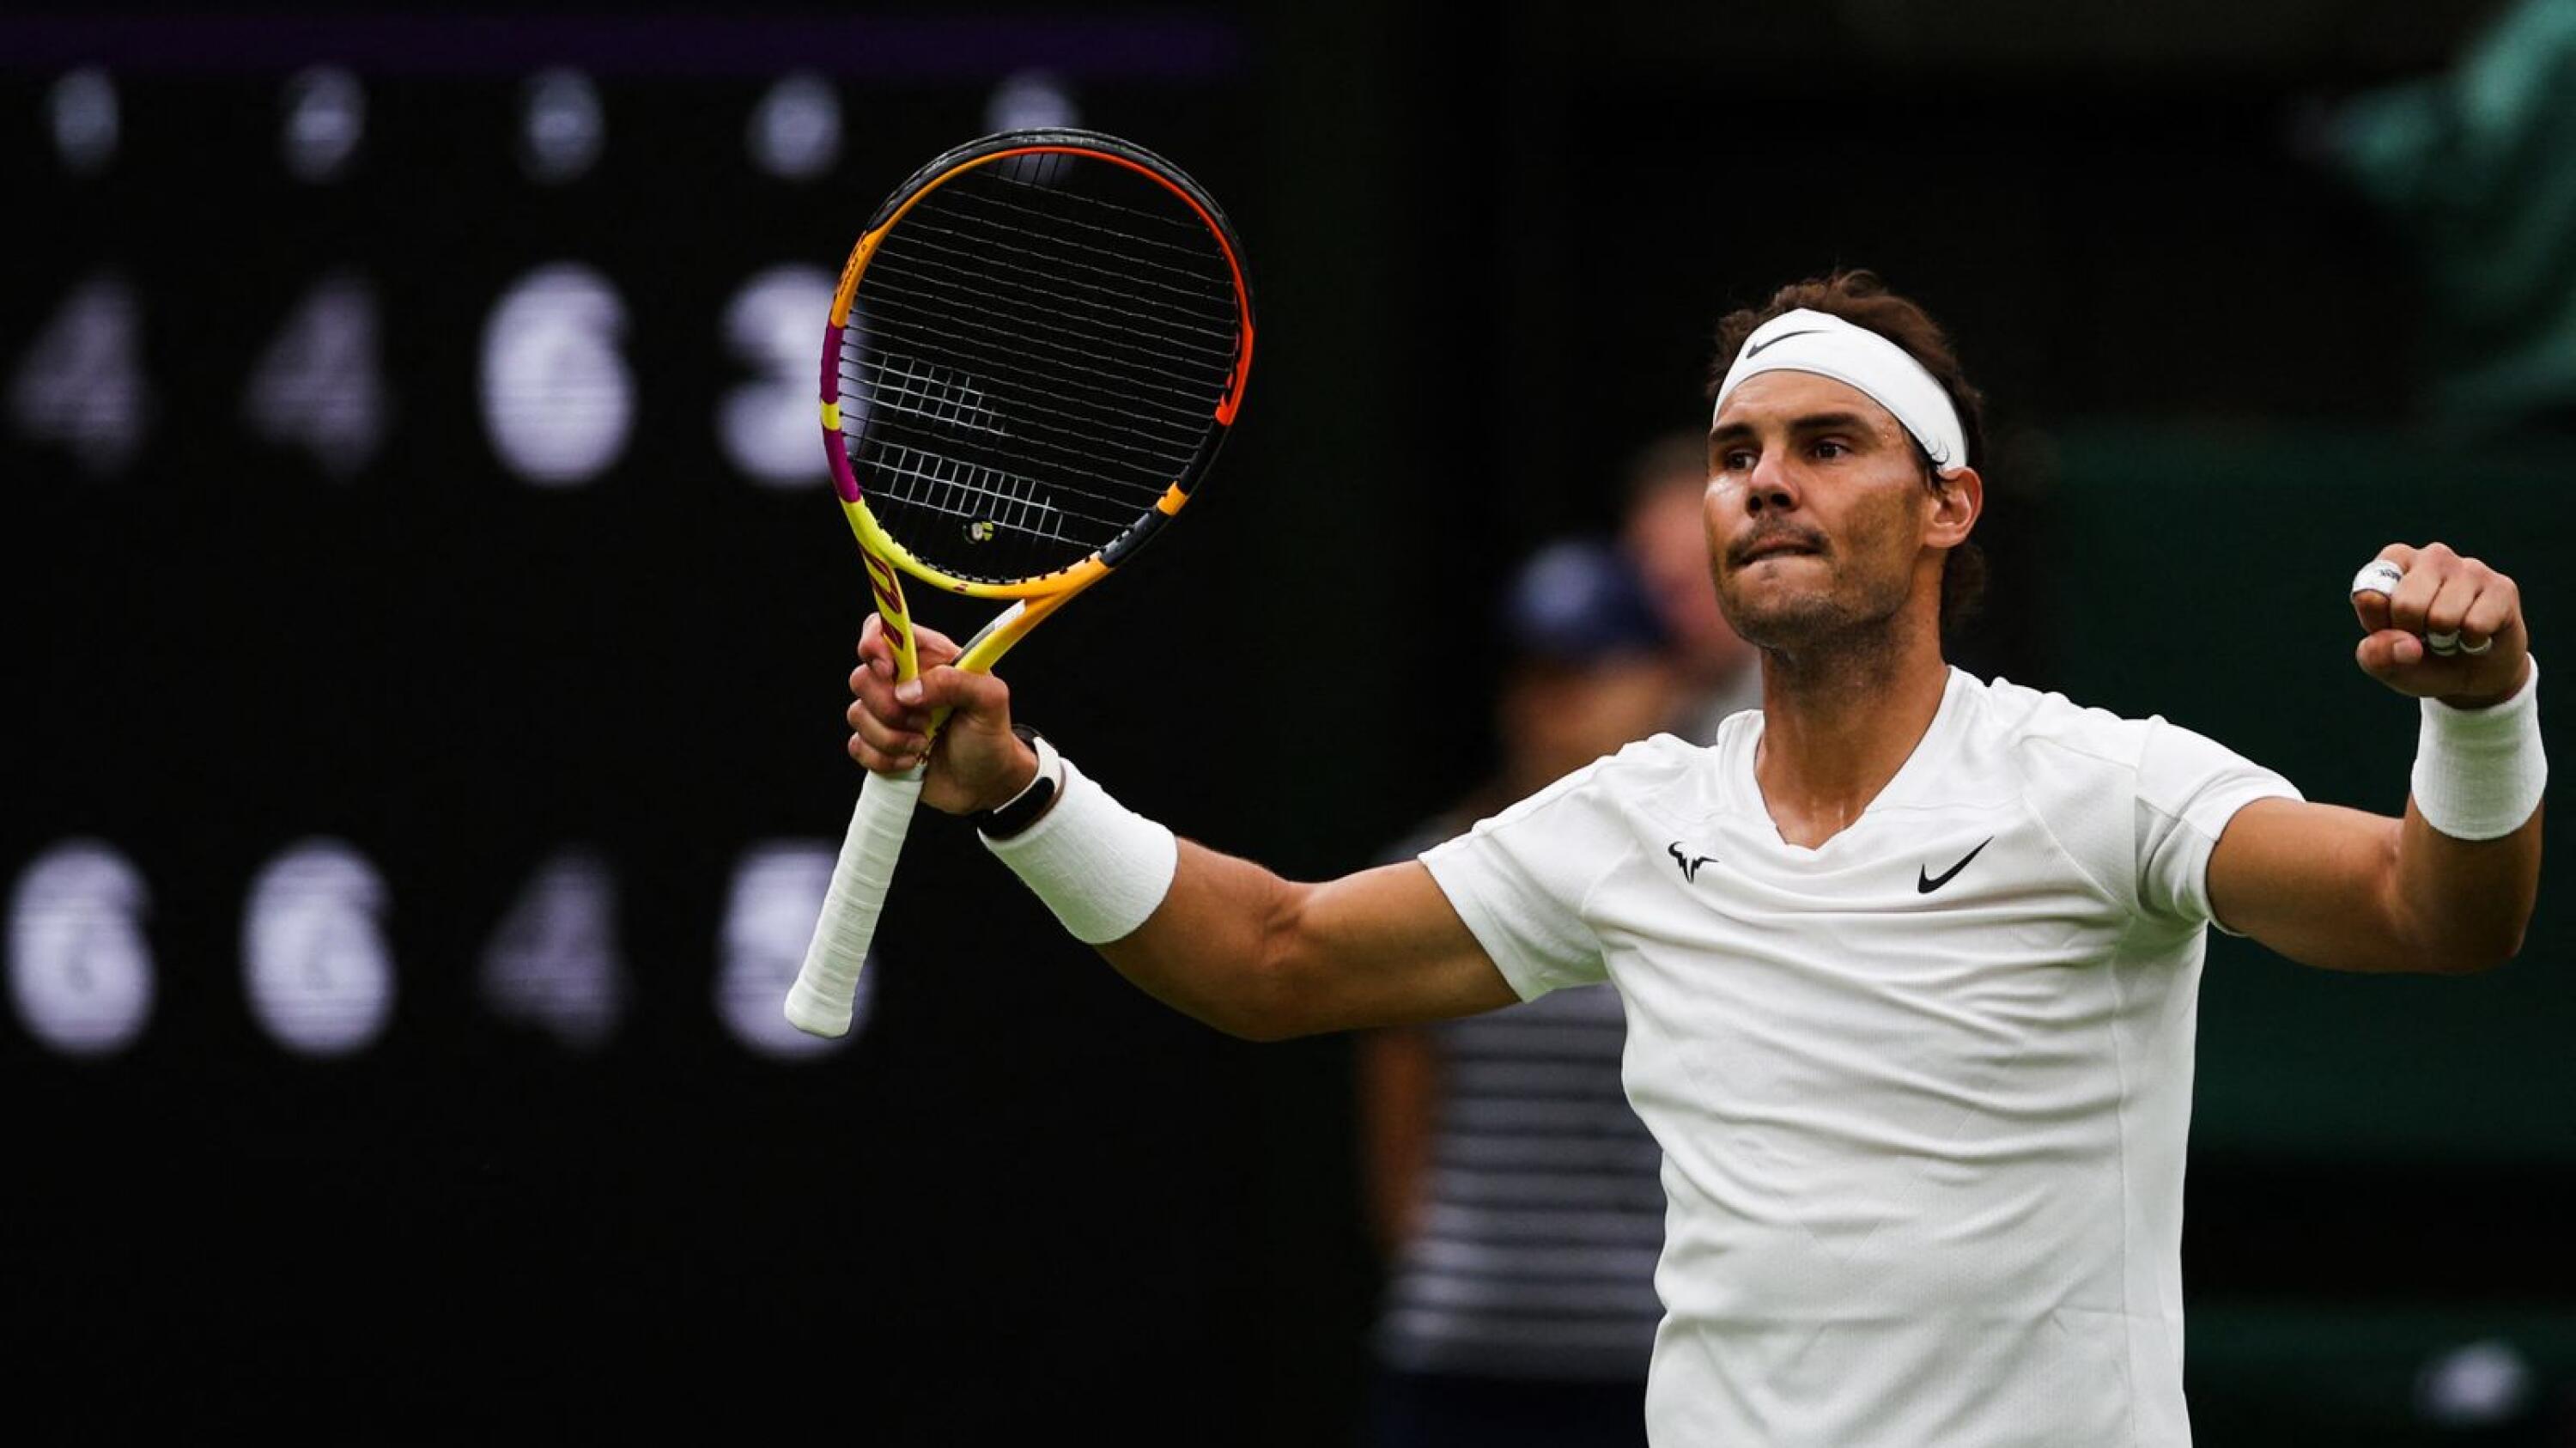 Spain's Rafael Nadal celebrates winning against Lithuania's Ricardas Berankis at the end of their men's singles tennis match on the fourth day of the 2022 Wimbledon Championships at The All England Tennis Club in Wimbledon, southwest London on Thursday